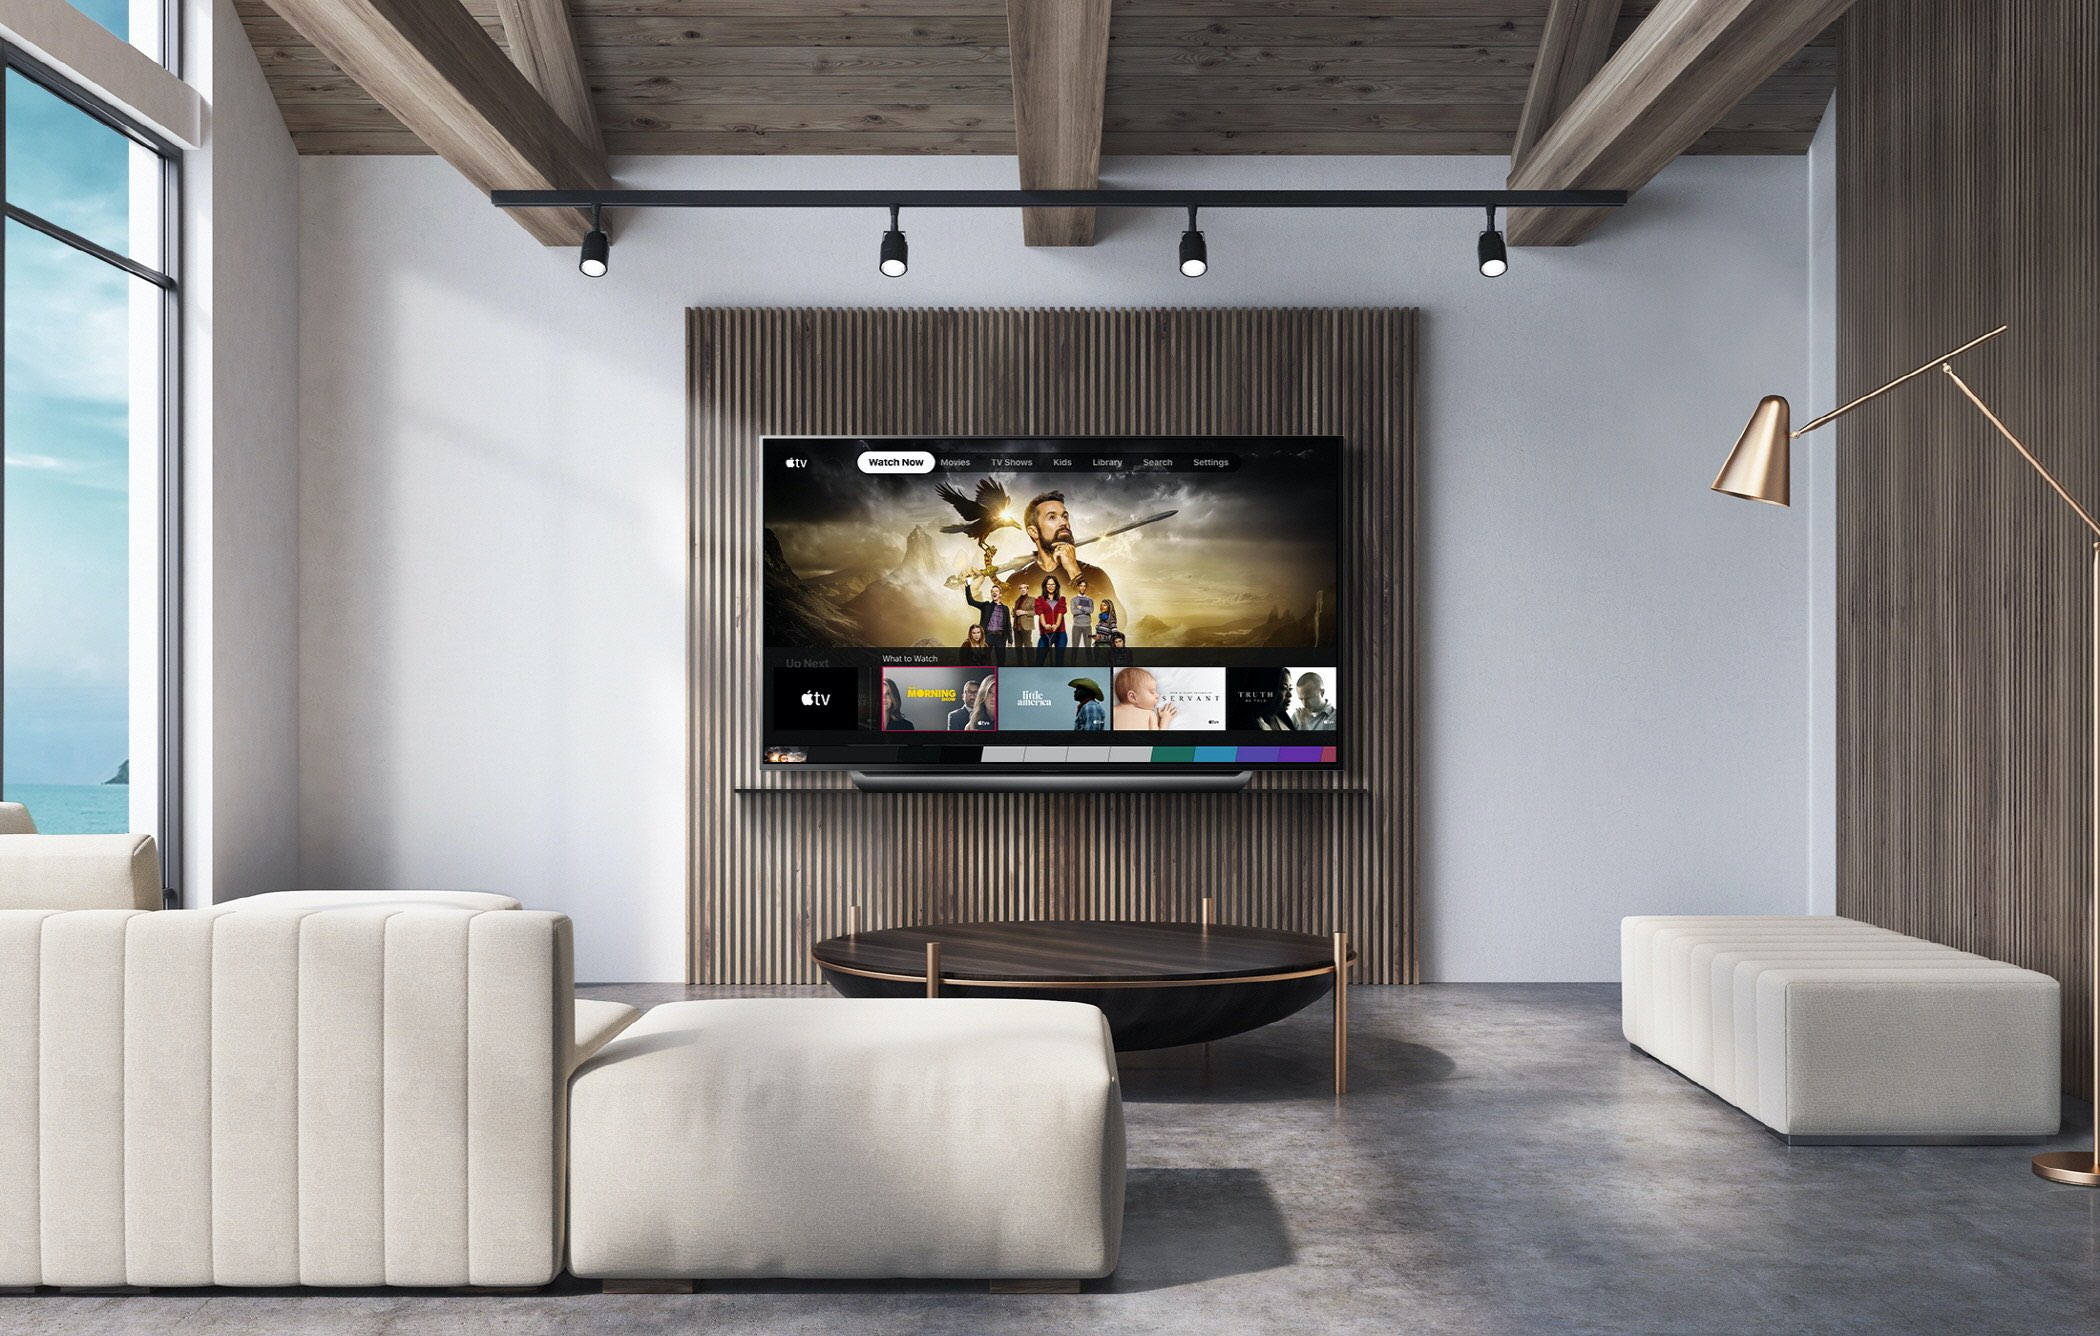 LG's marketing image showing its OLED TV Hund up on the wall, with Apple's TV app running